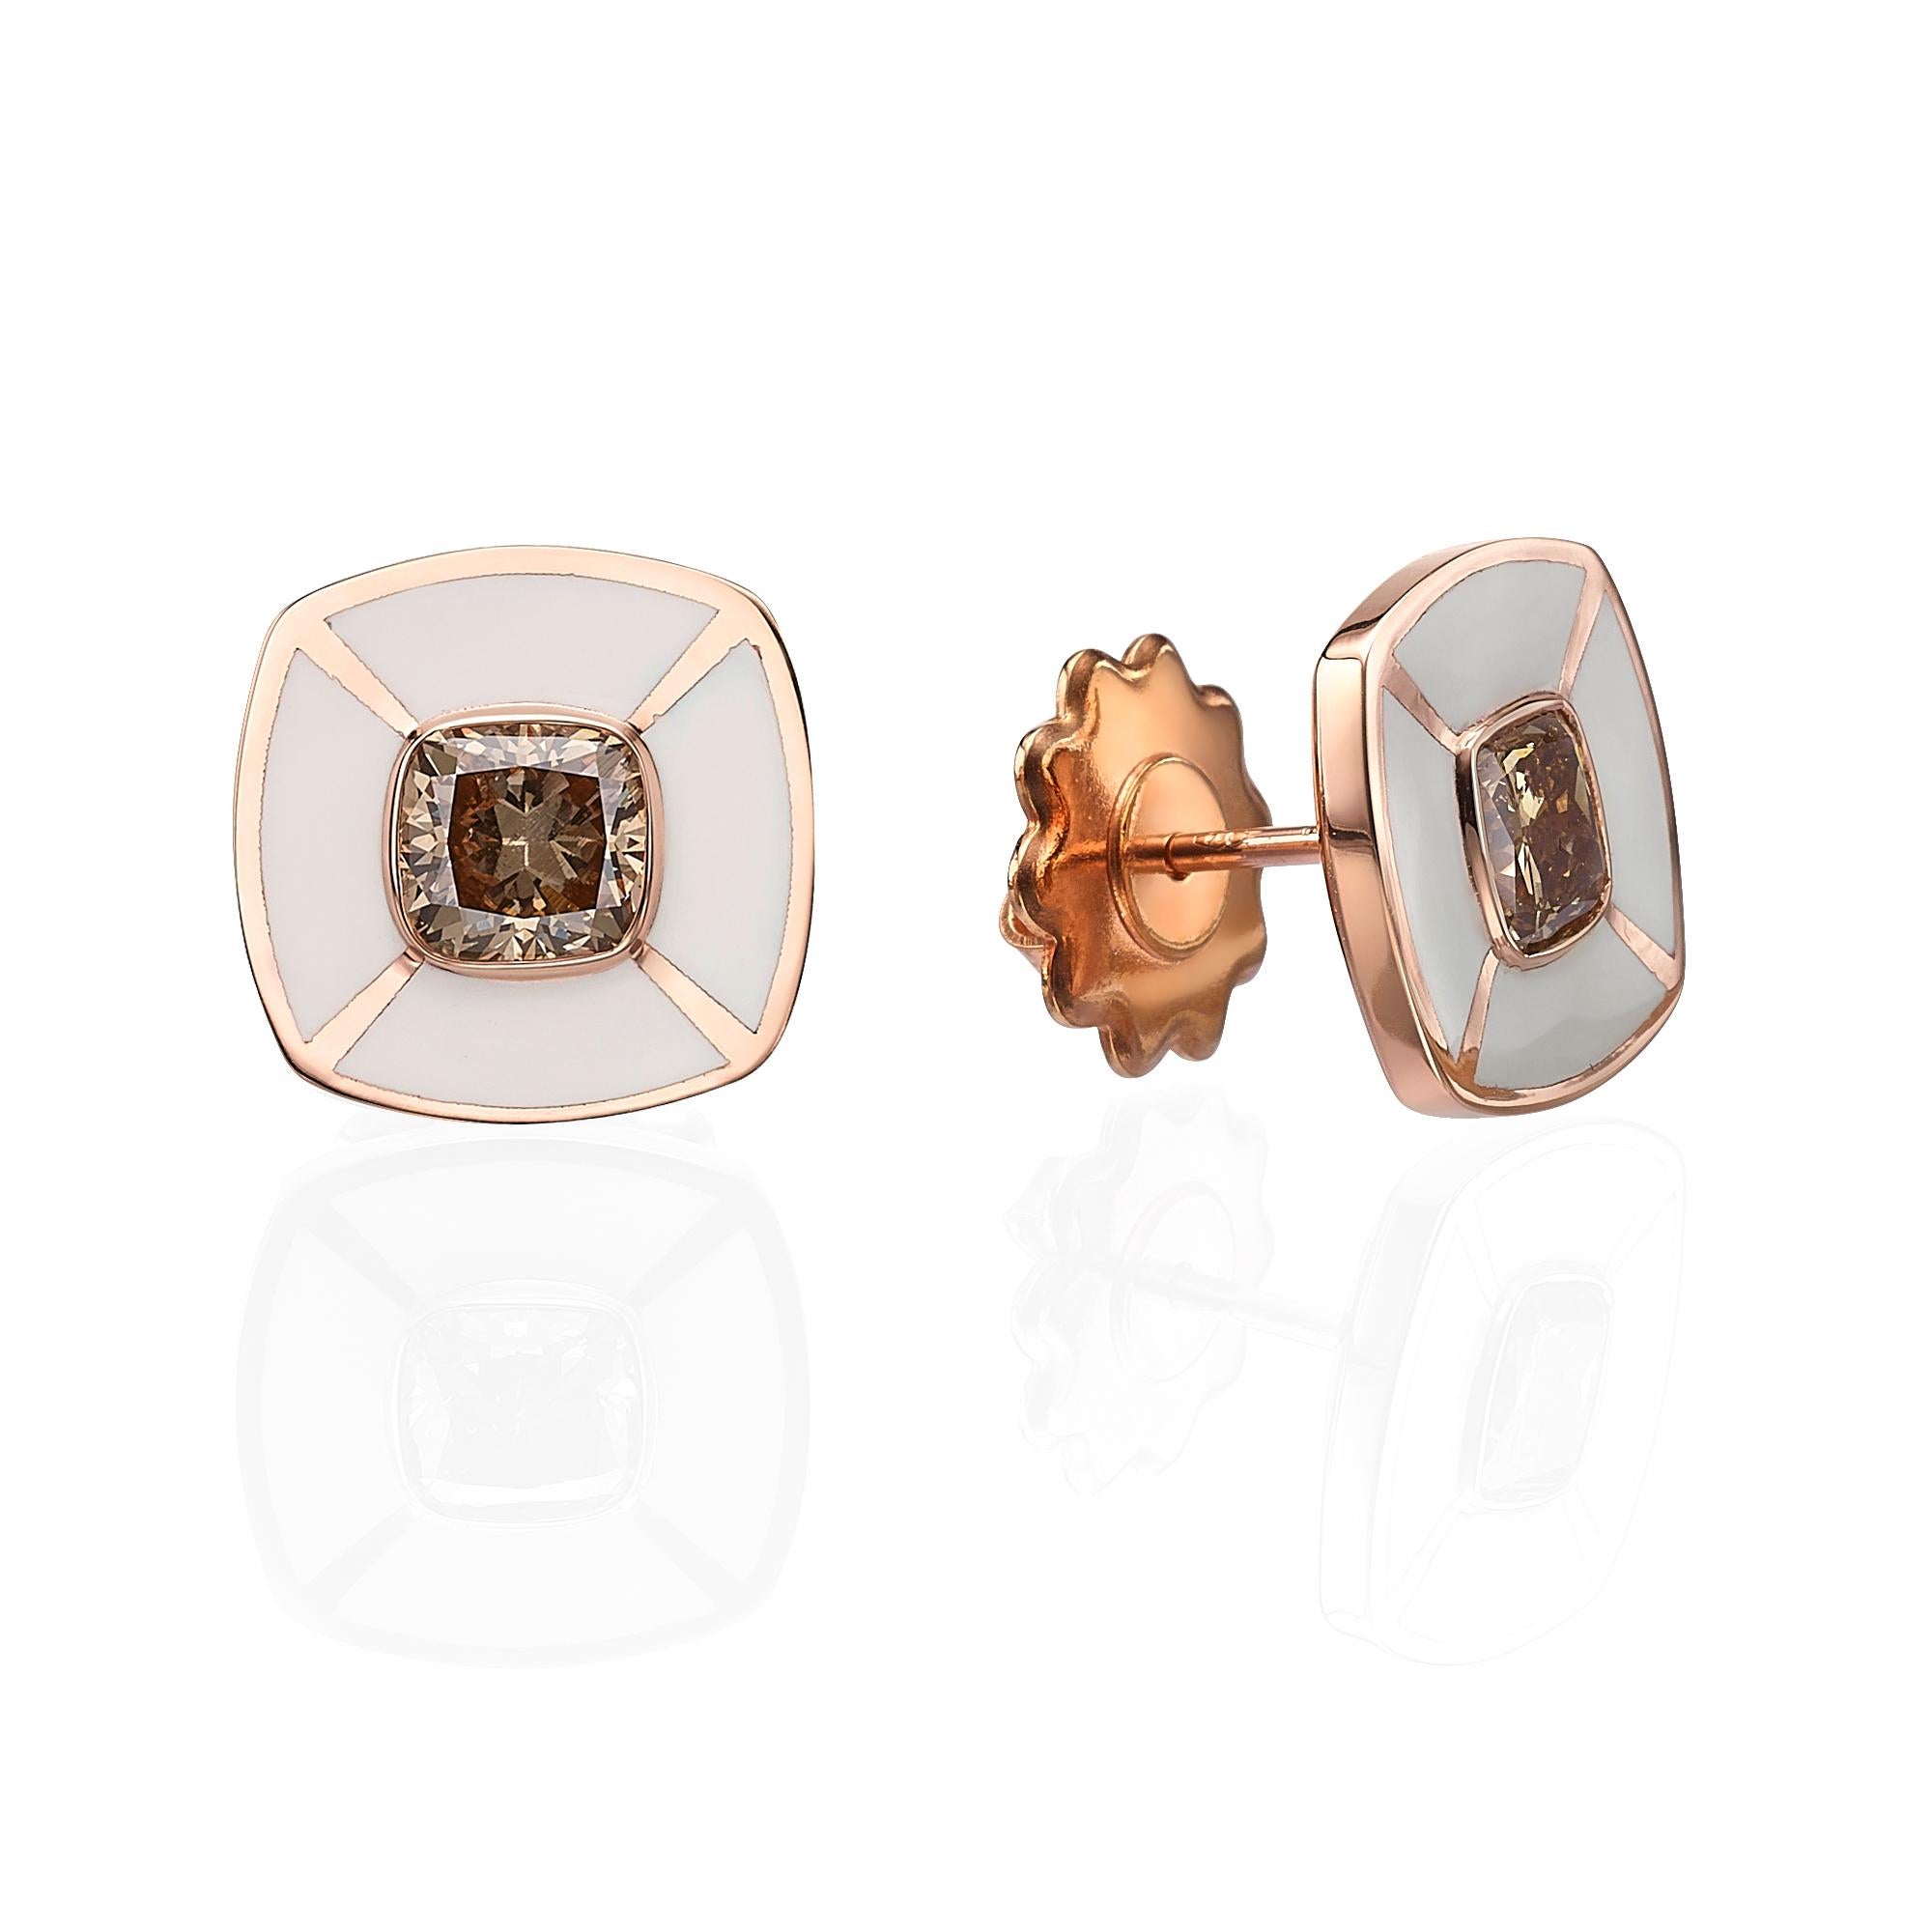 SKU# 4006138

Elevate your style with these beautiful 18k Rose Gold Stud diamond Earrings with White Enamel. Each earring features a cushion-cut Champagne diamond, set in a rich rose gold bezel setting, with a combined total weight of 2.02 carats.